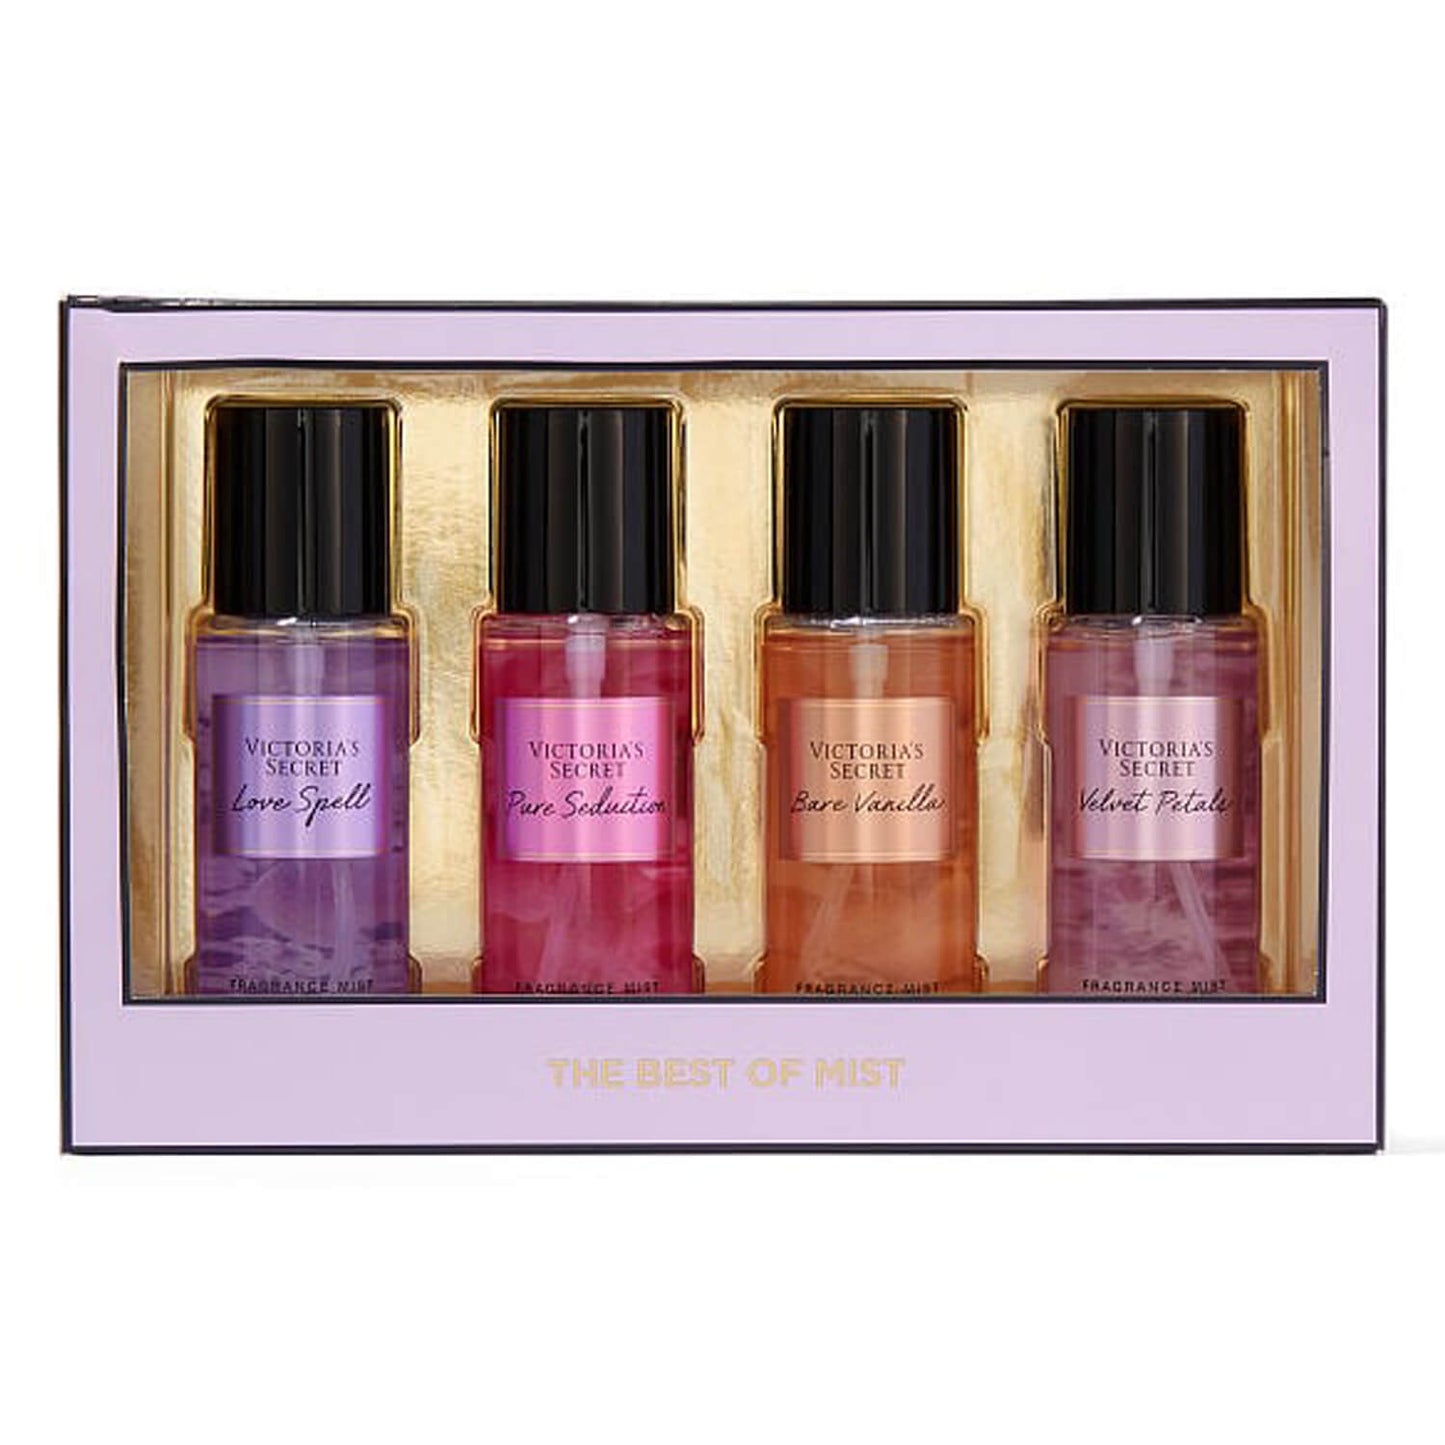 Shop Victoria Secret best-selling mists in Pure Seduction, Velvet Petals, Love Spell and Bare Vanilla fragrances available at Heygirl.pk for delivery in Pakistan